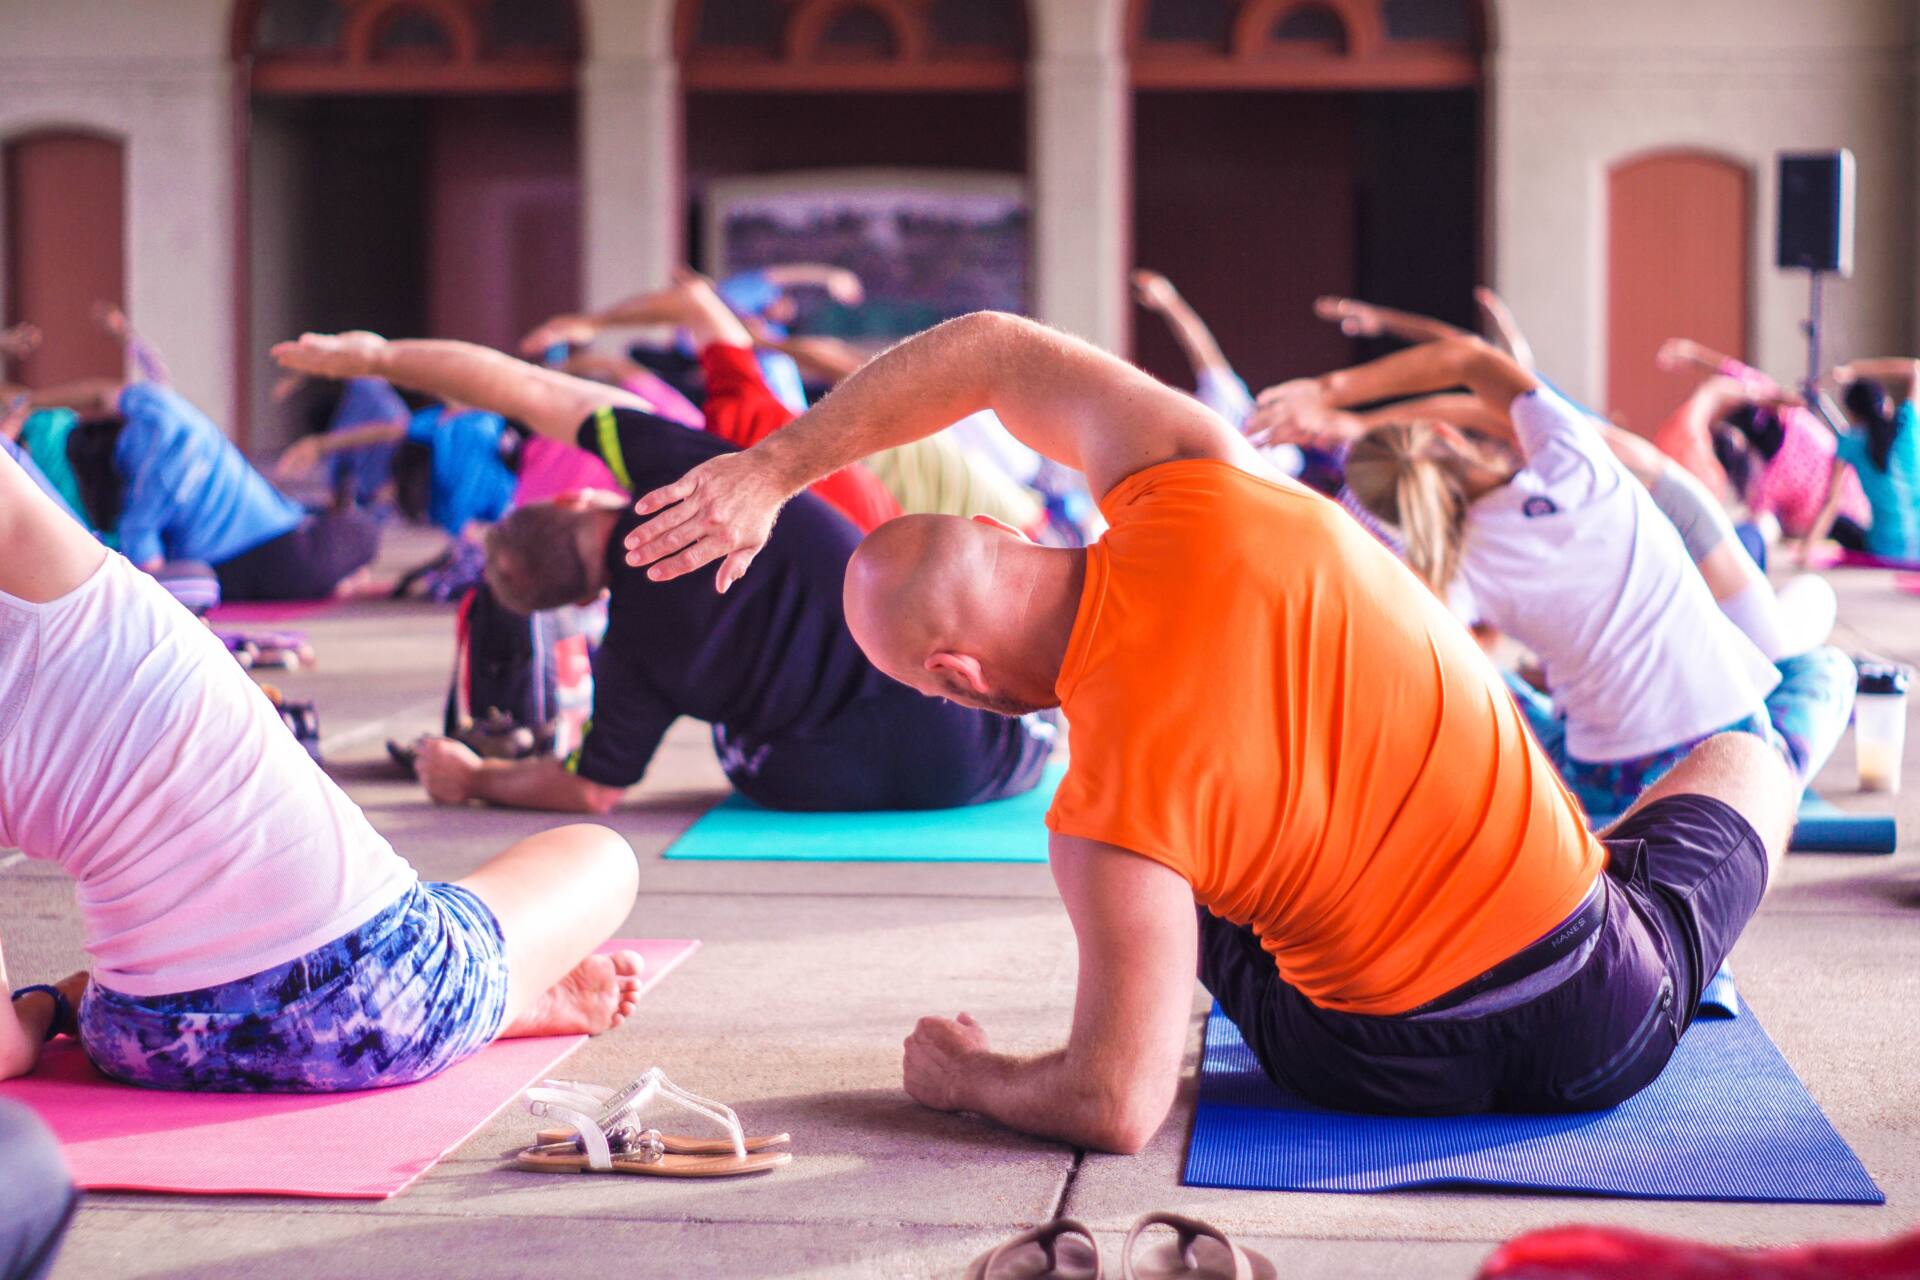 A Healthy Event Offers Yoga